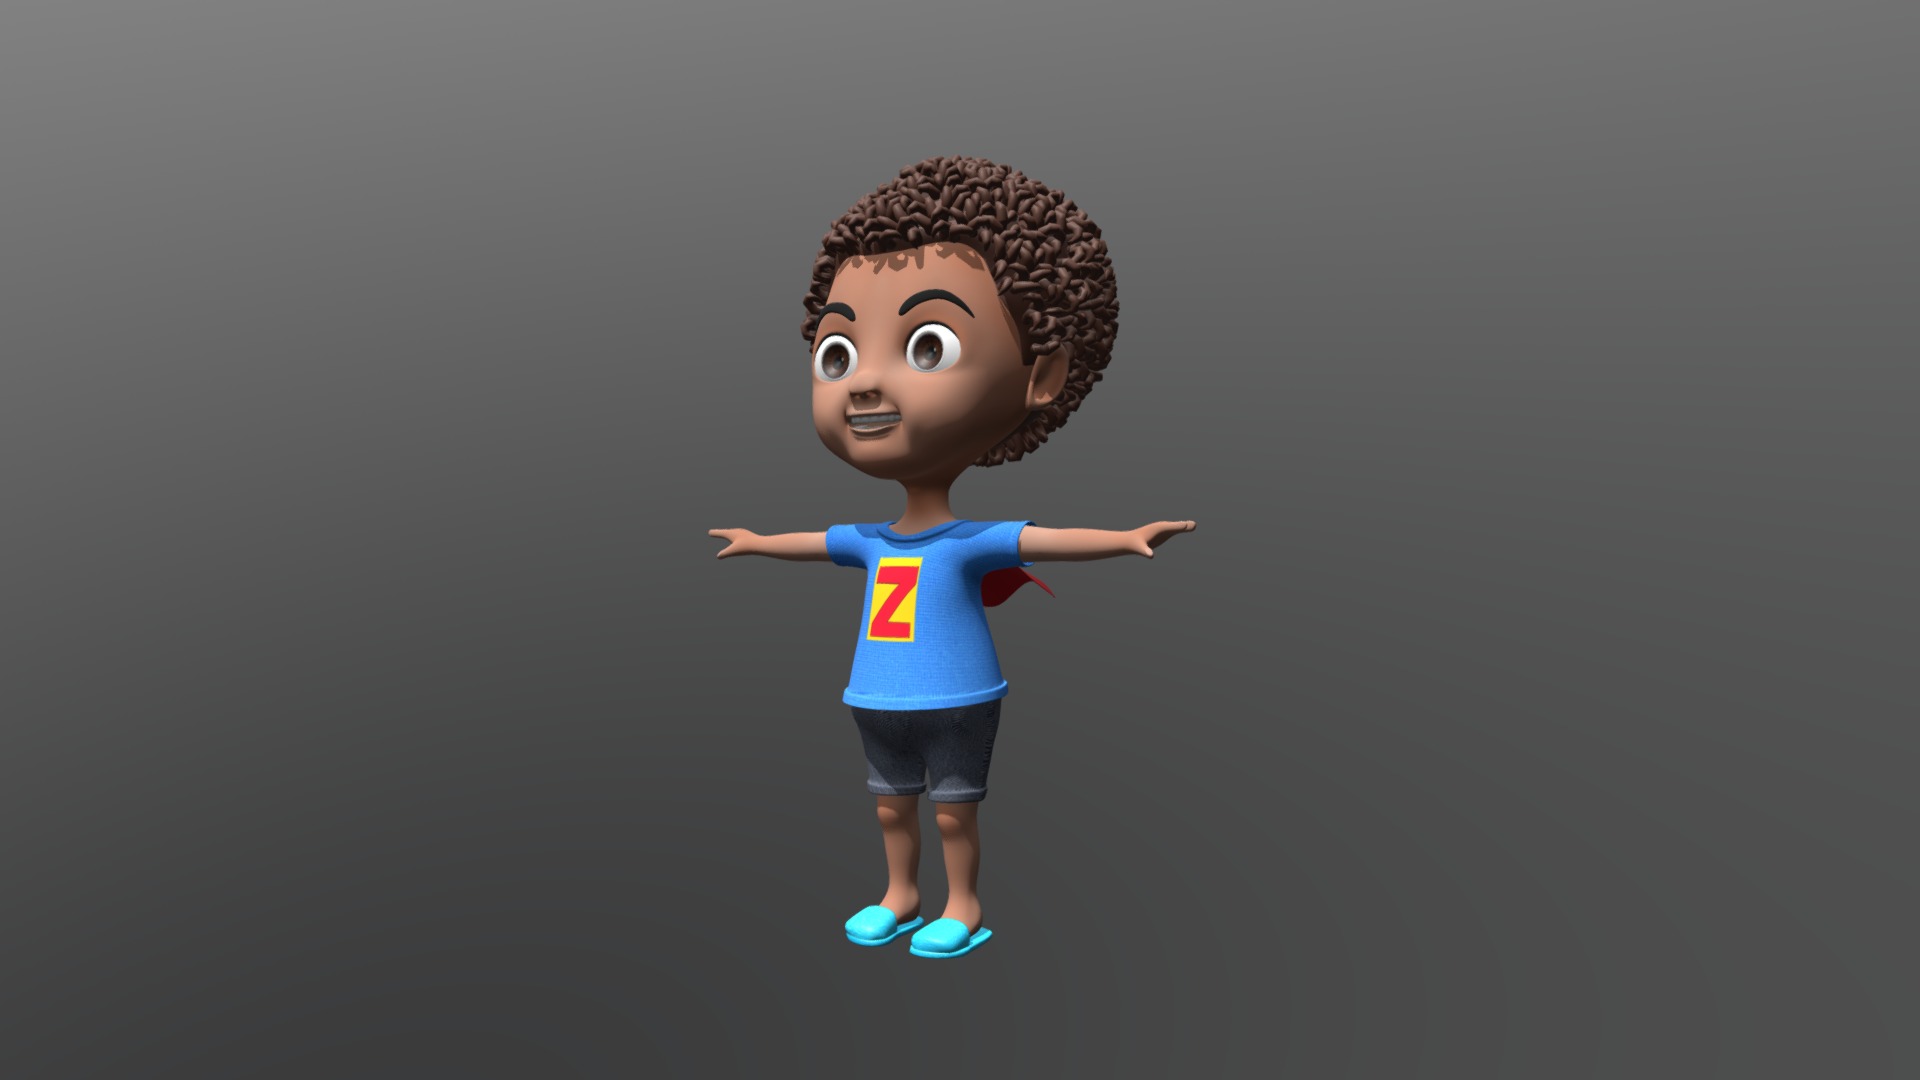 3D model Zaki - This is a 3D model of the Zaki. The 3D model is about a toy doll with a blue shirt.